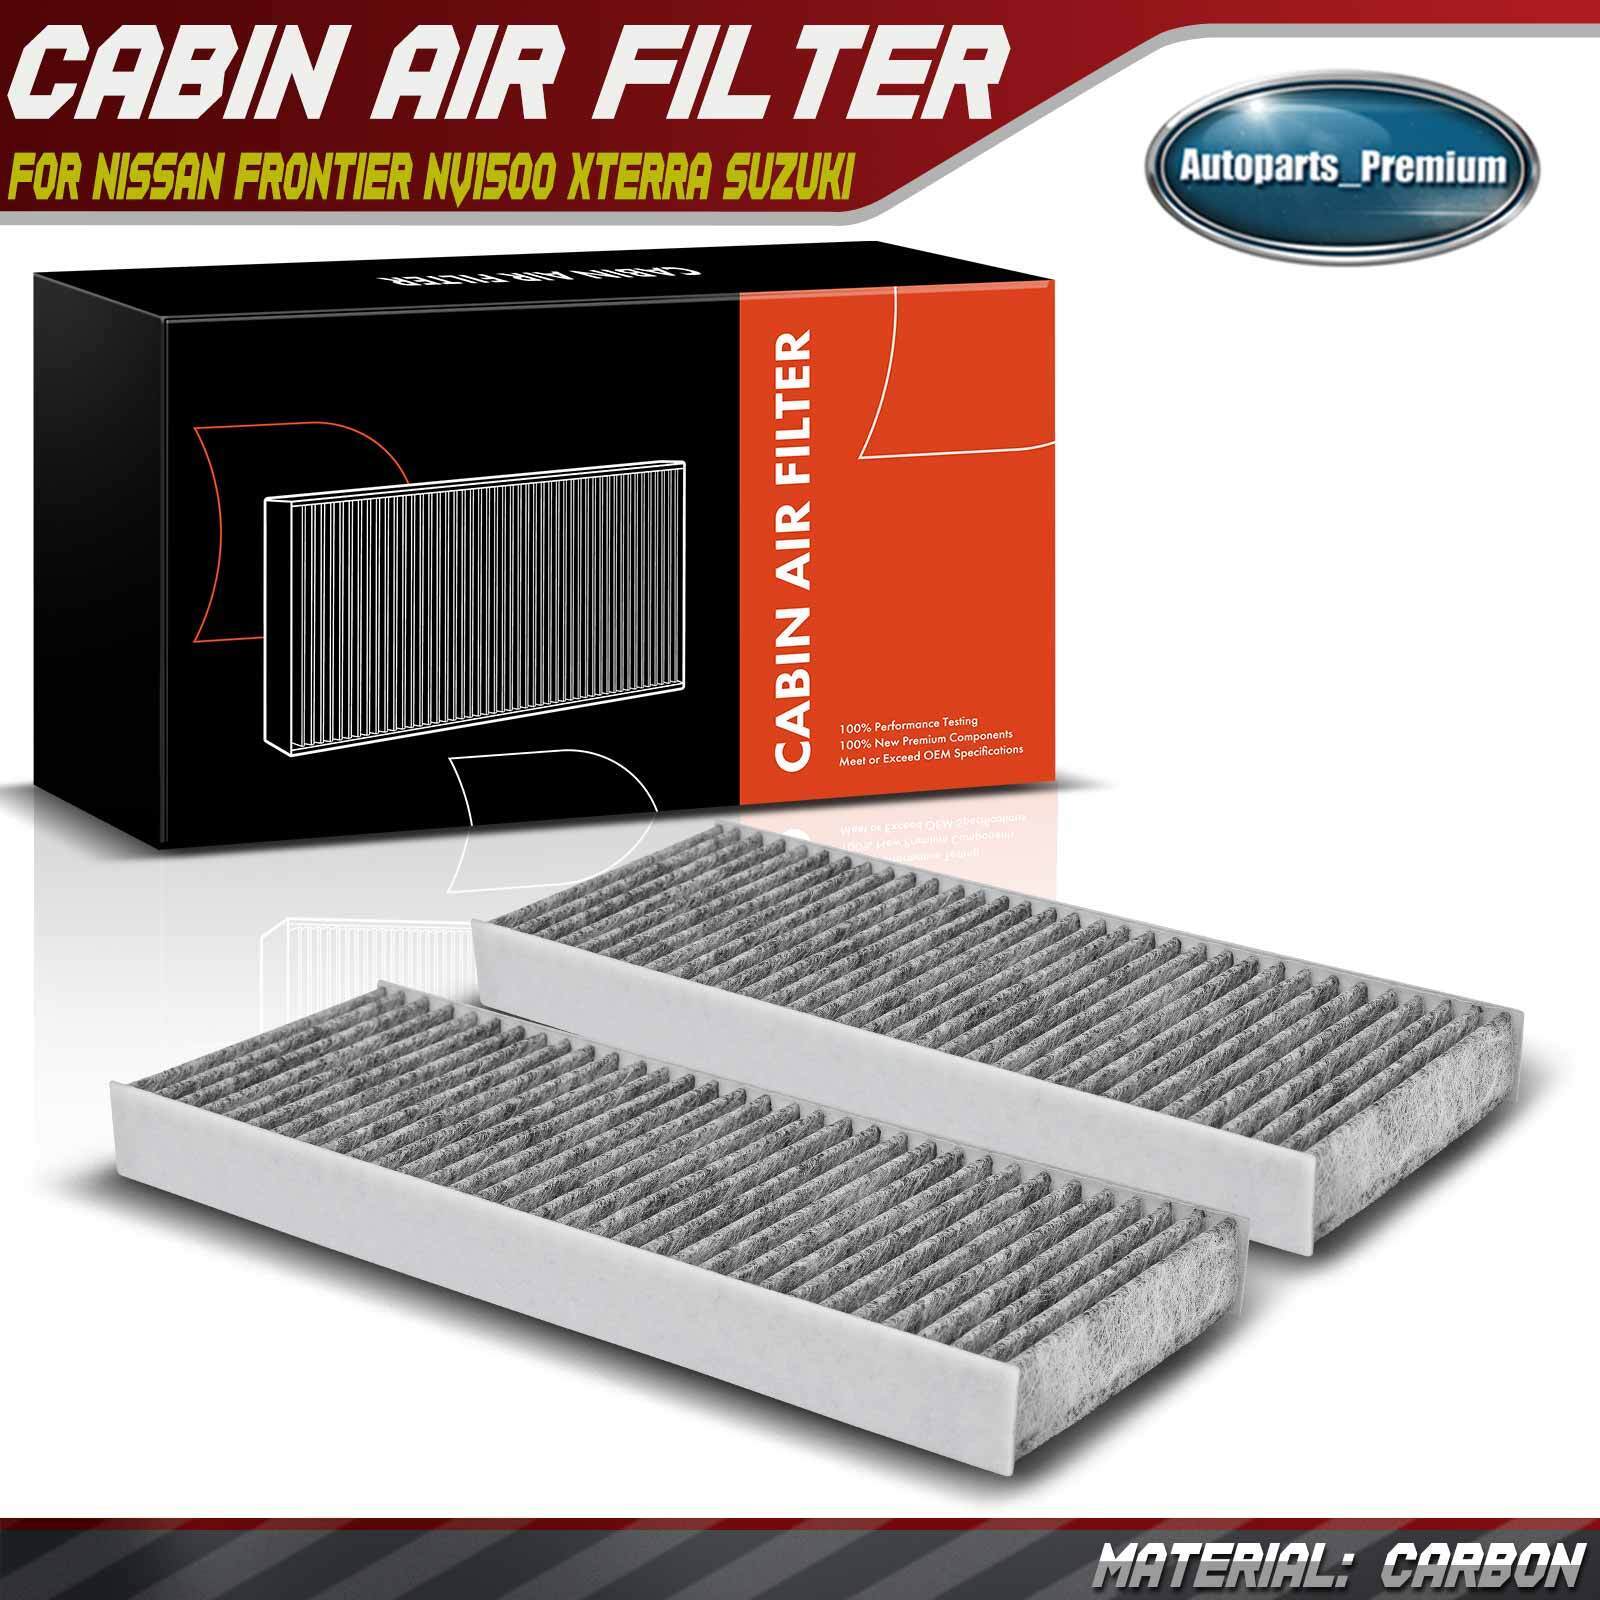 2x Activated Carbon Cabin Air Filter for Nissan Frontier NV1500 Xterra Equator